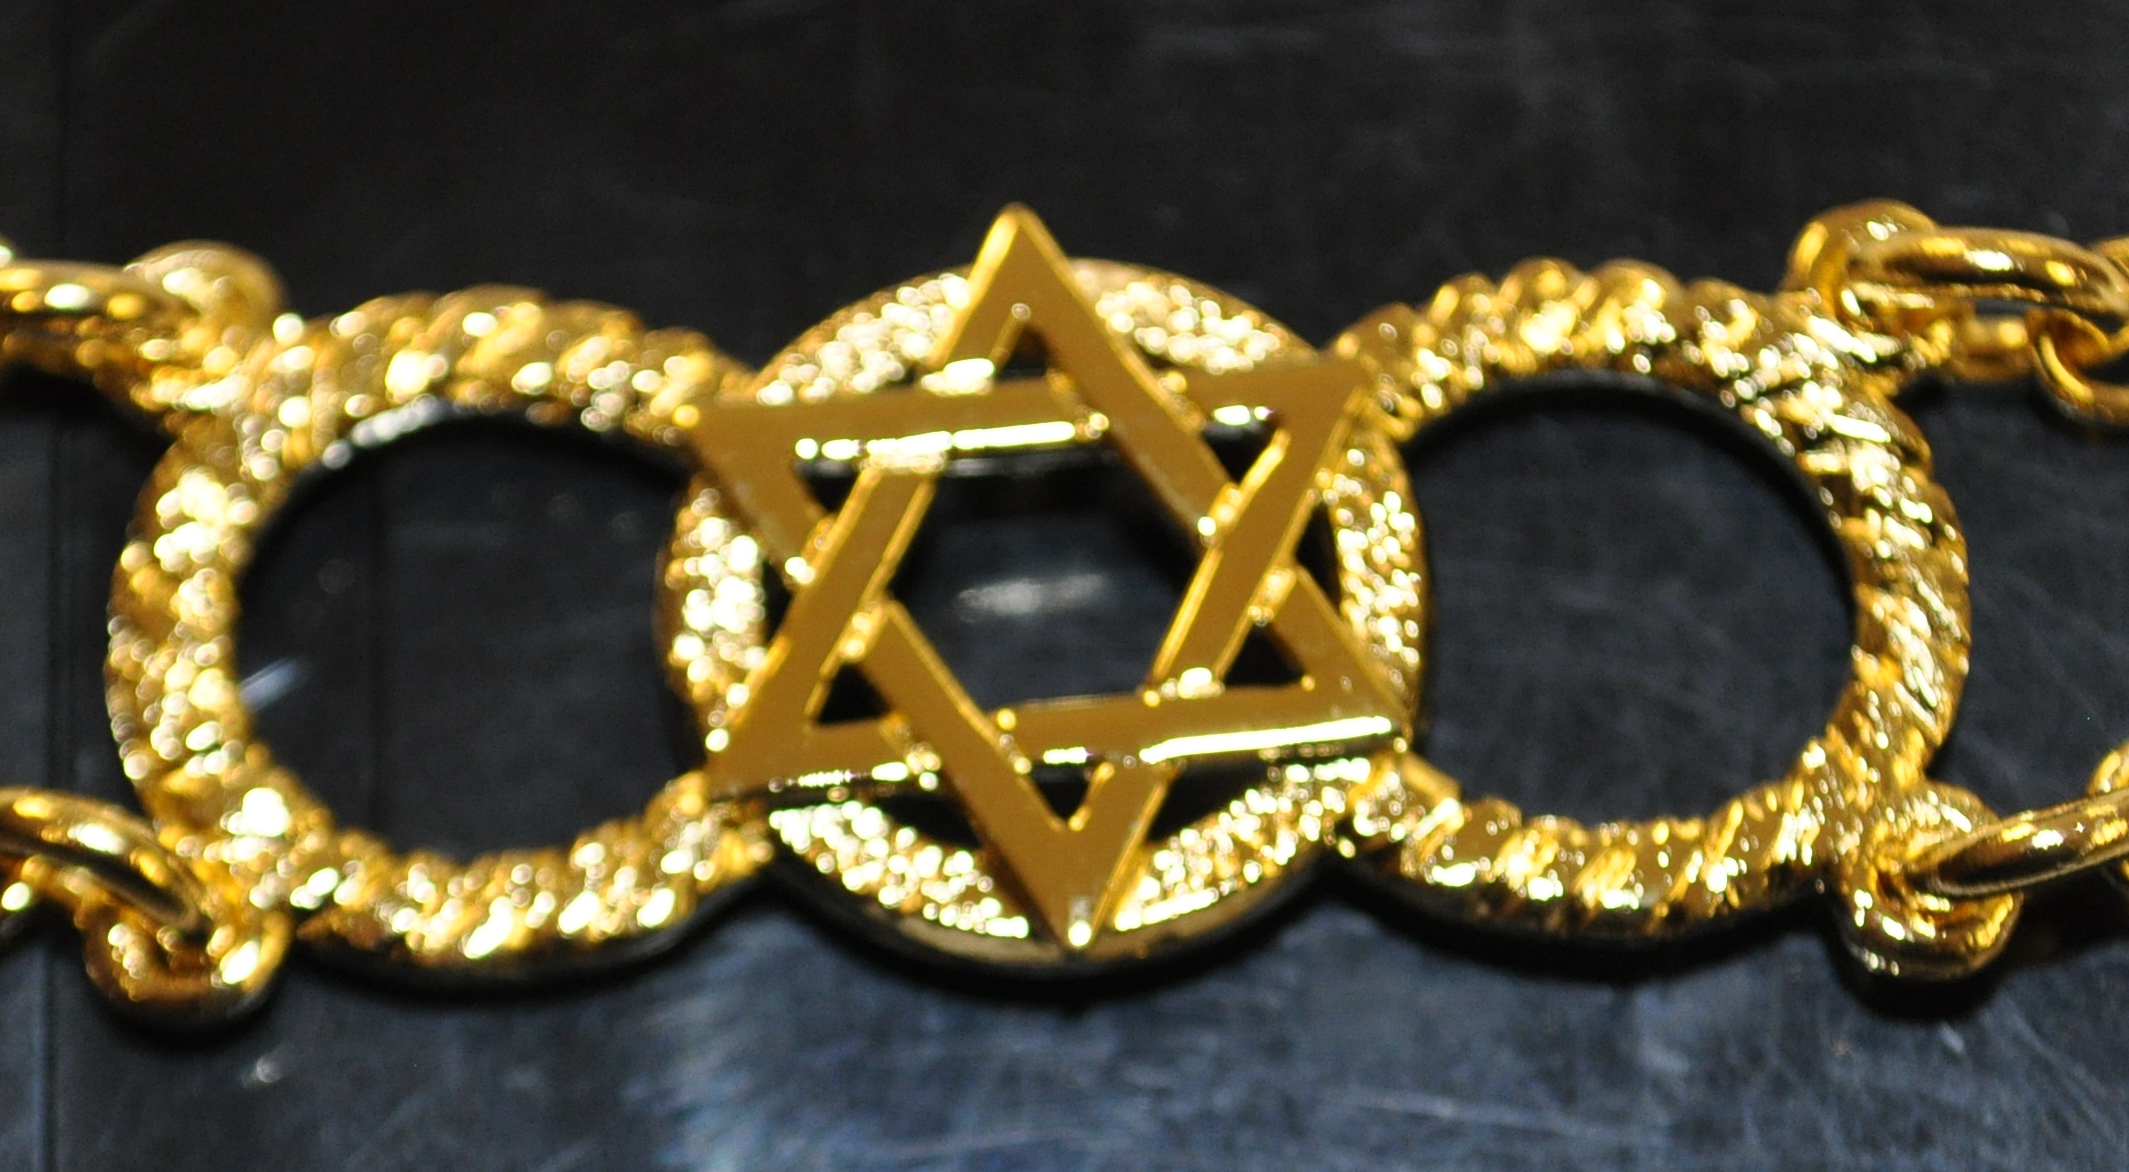 Craft Chain Metalwork - Star of David / Seal of Solomon with OOO - Gilt